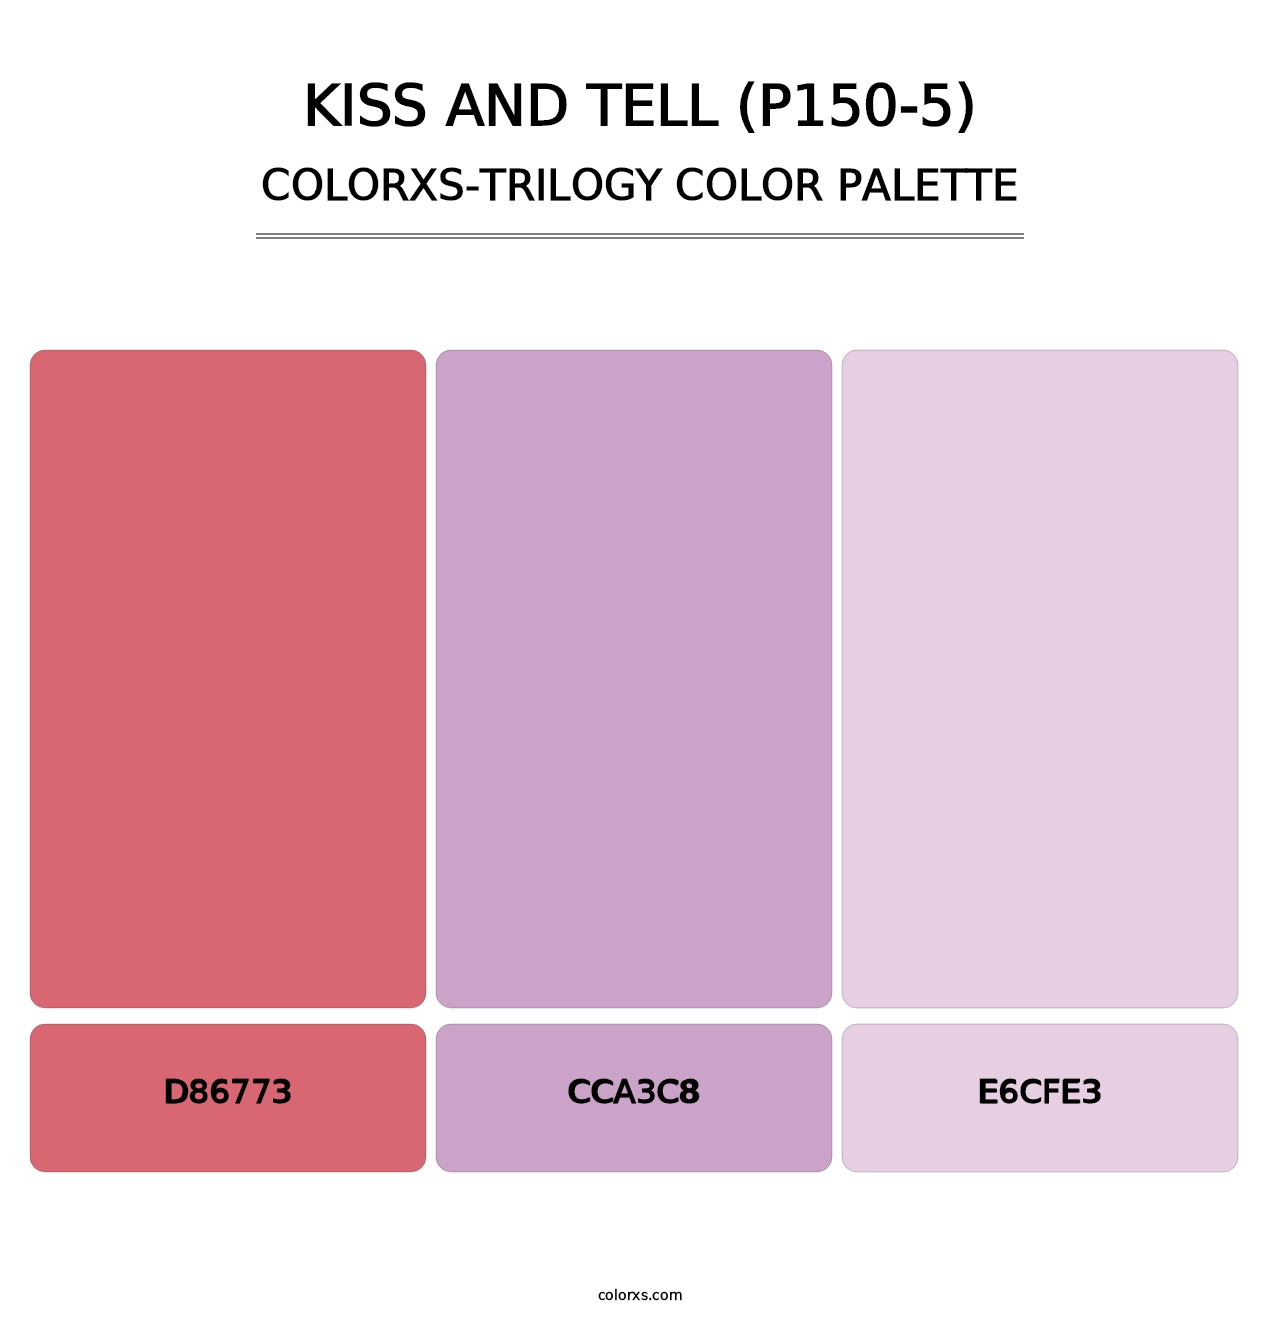 Kiss And Tell (P150-5) - Colorxs Trilogy Palette